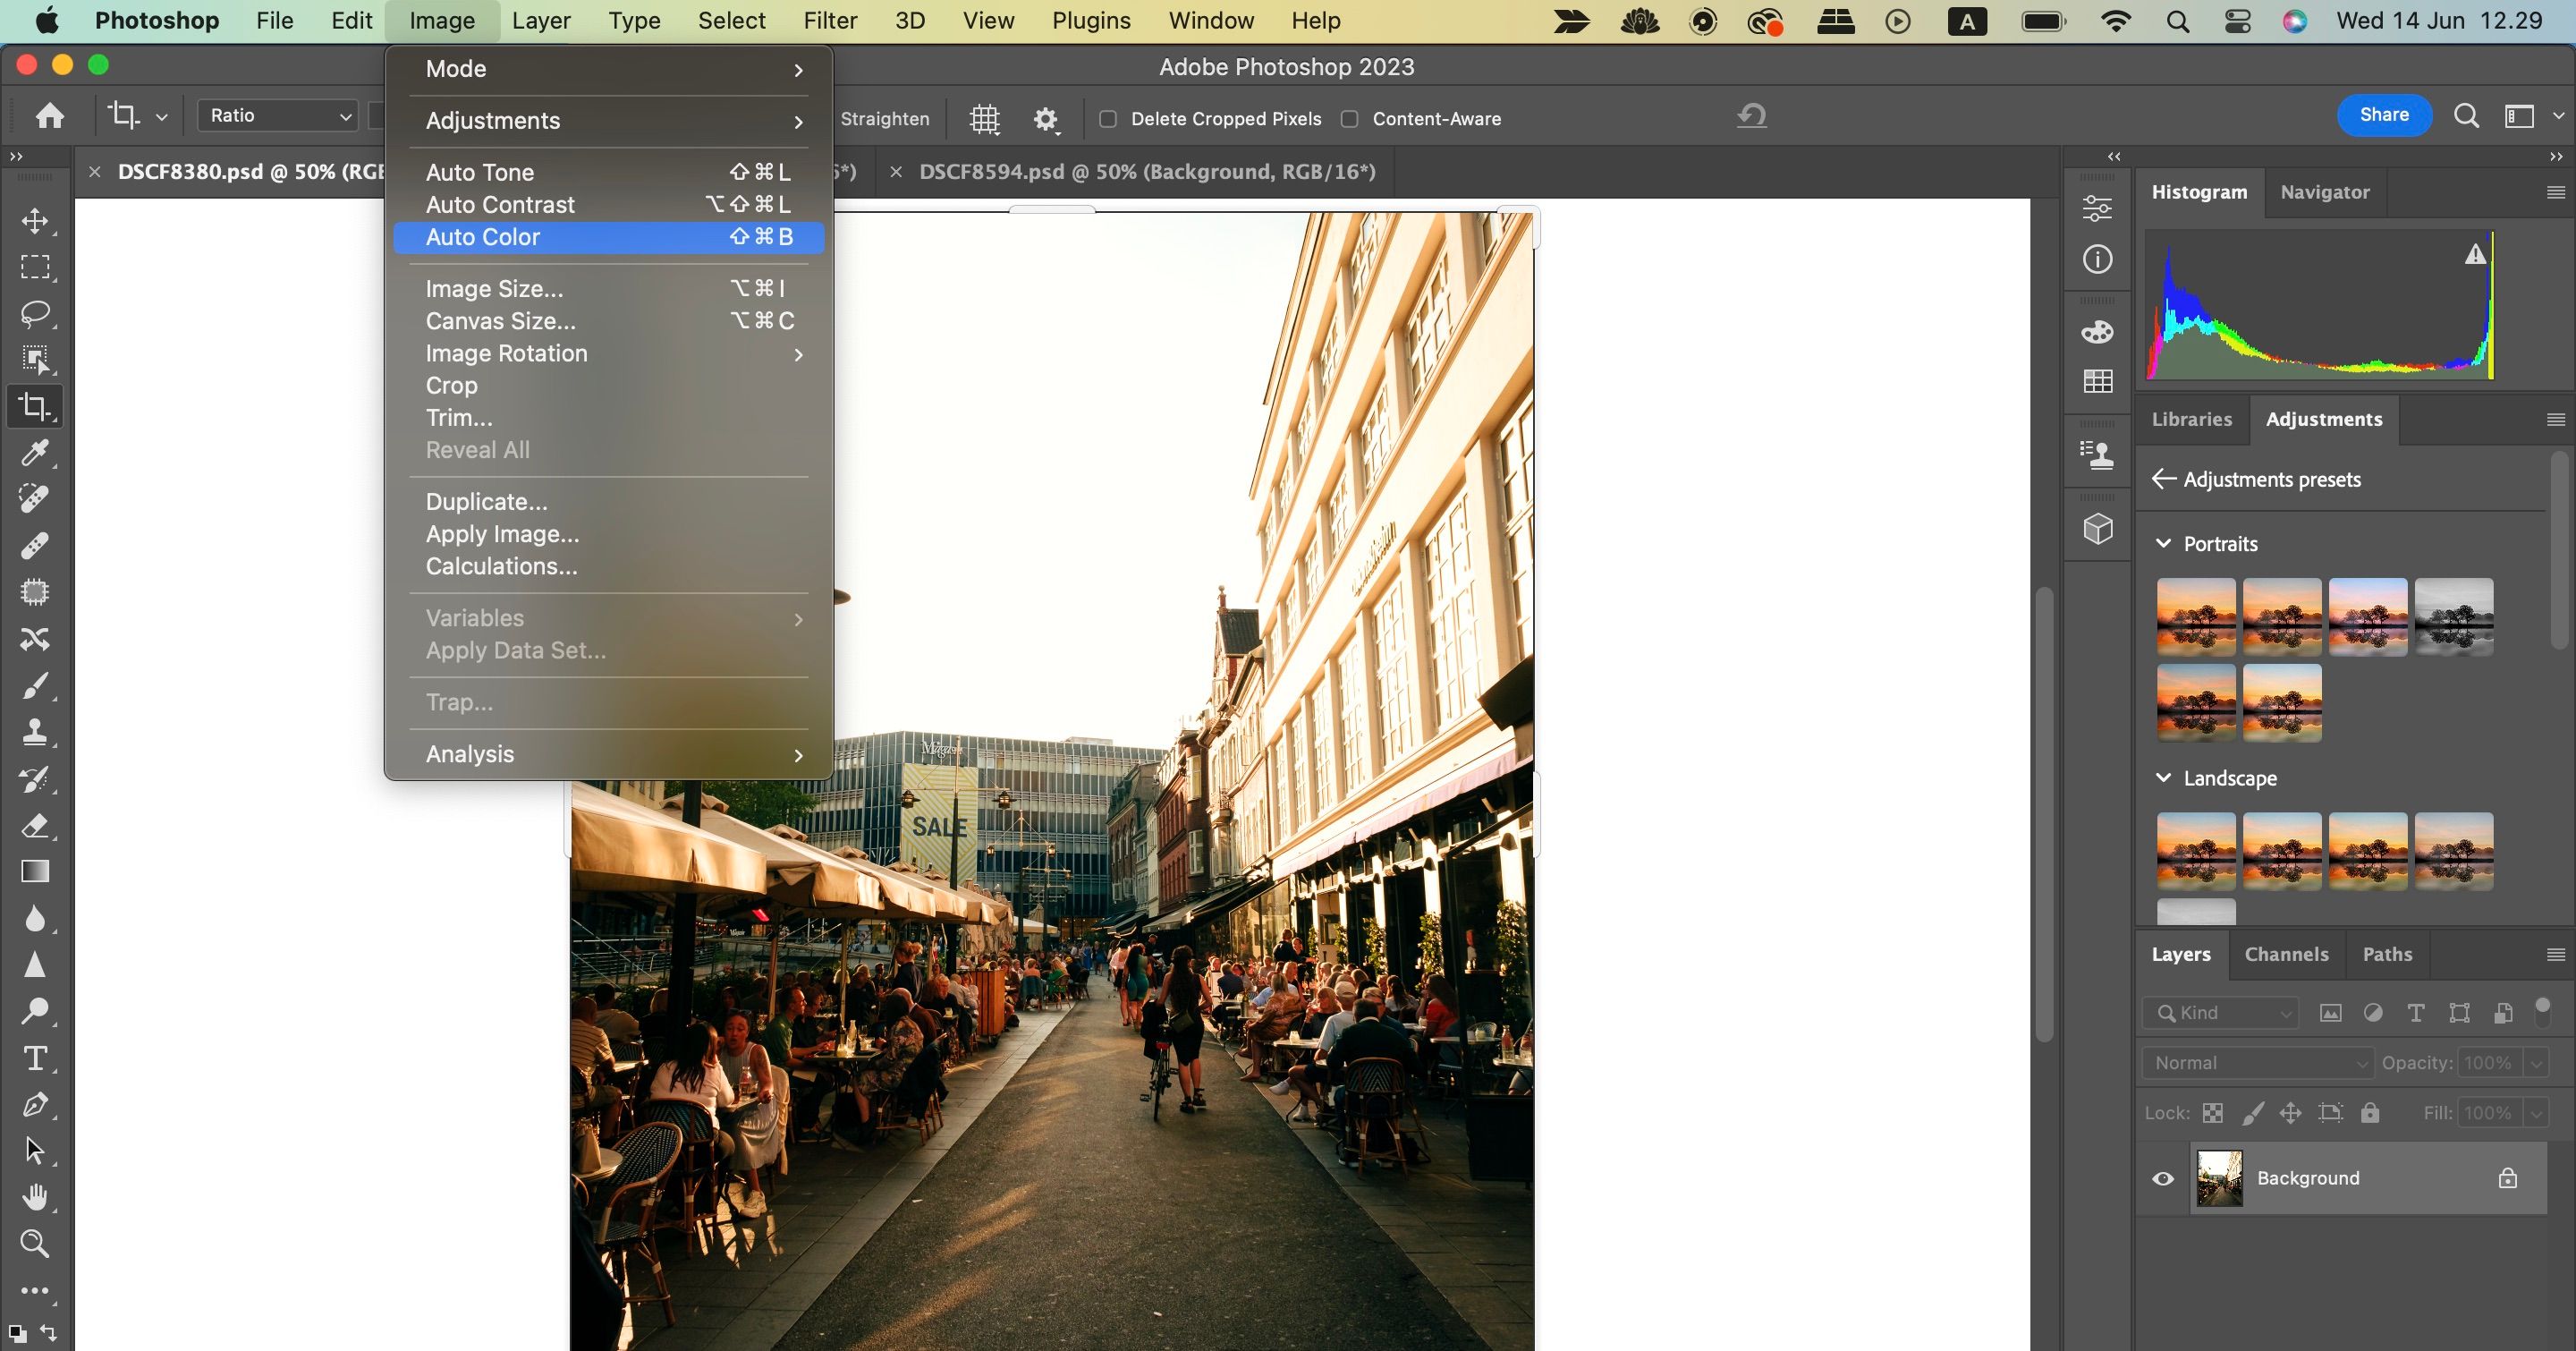 How to Change the Color of an Image in Photoshop: 6 Ways